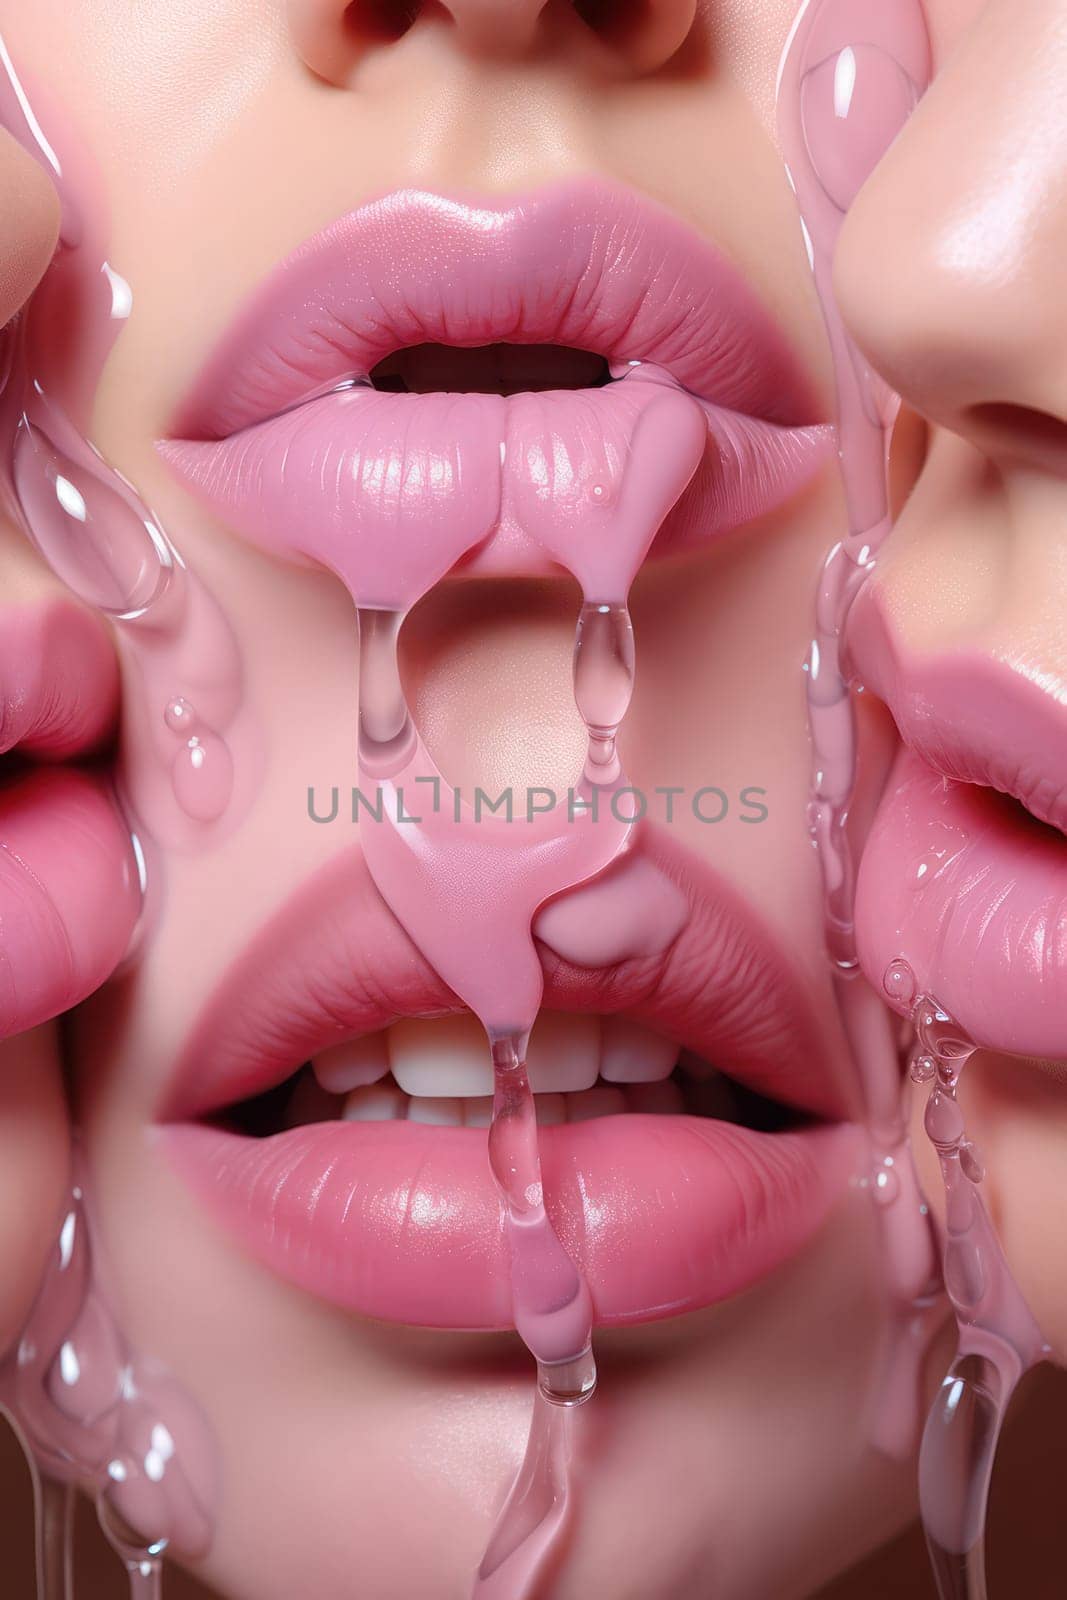 Glossy Temptation: A Sensual Close-up of a Woman's Shiny Red Lips with Dripping Lipgloss on a White Background by Vichizh